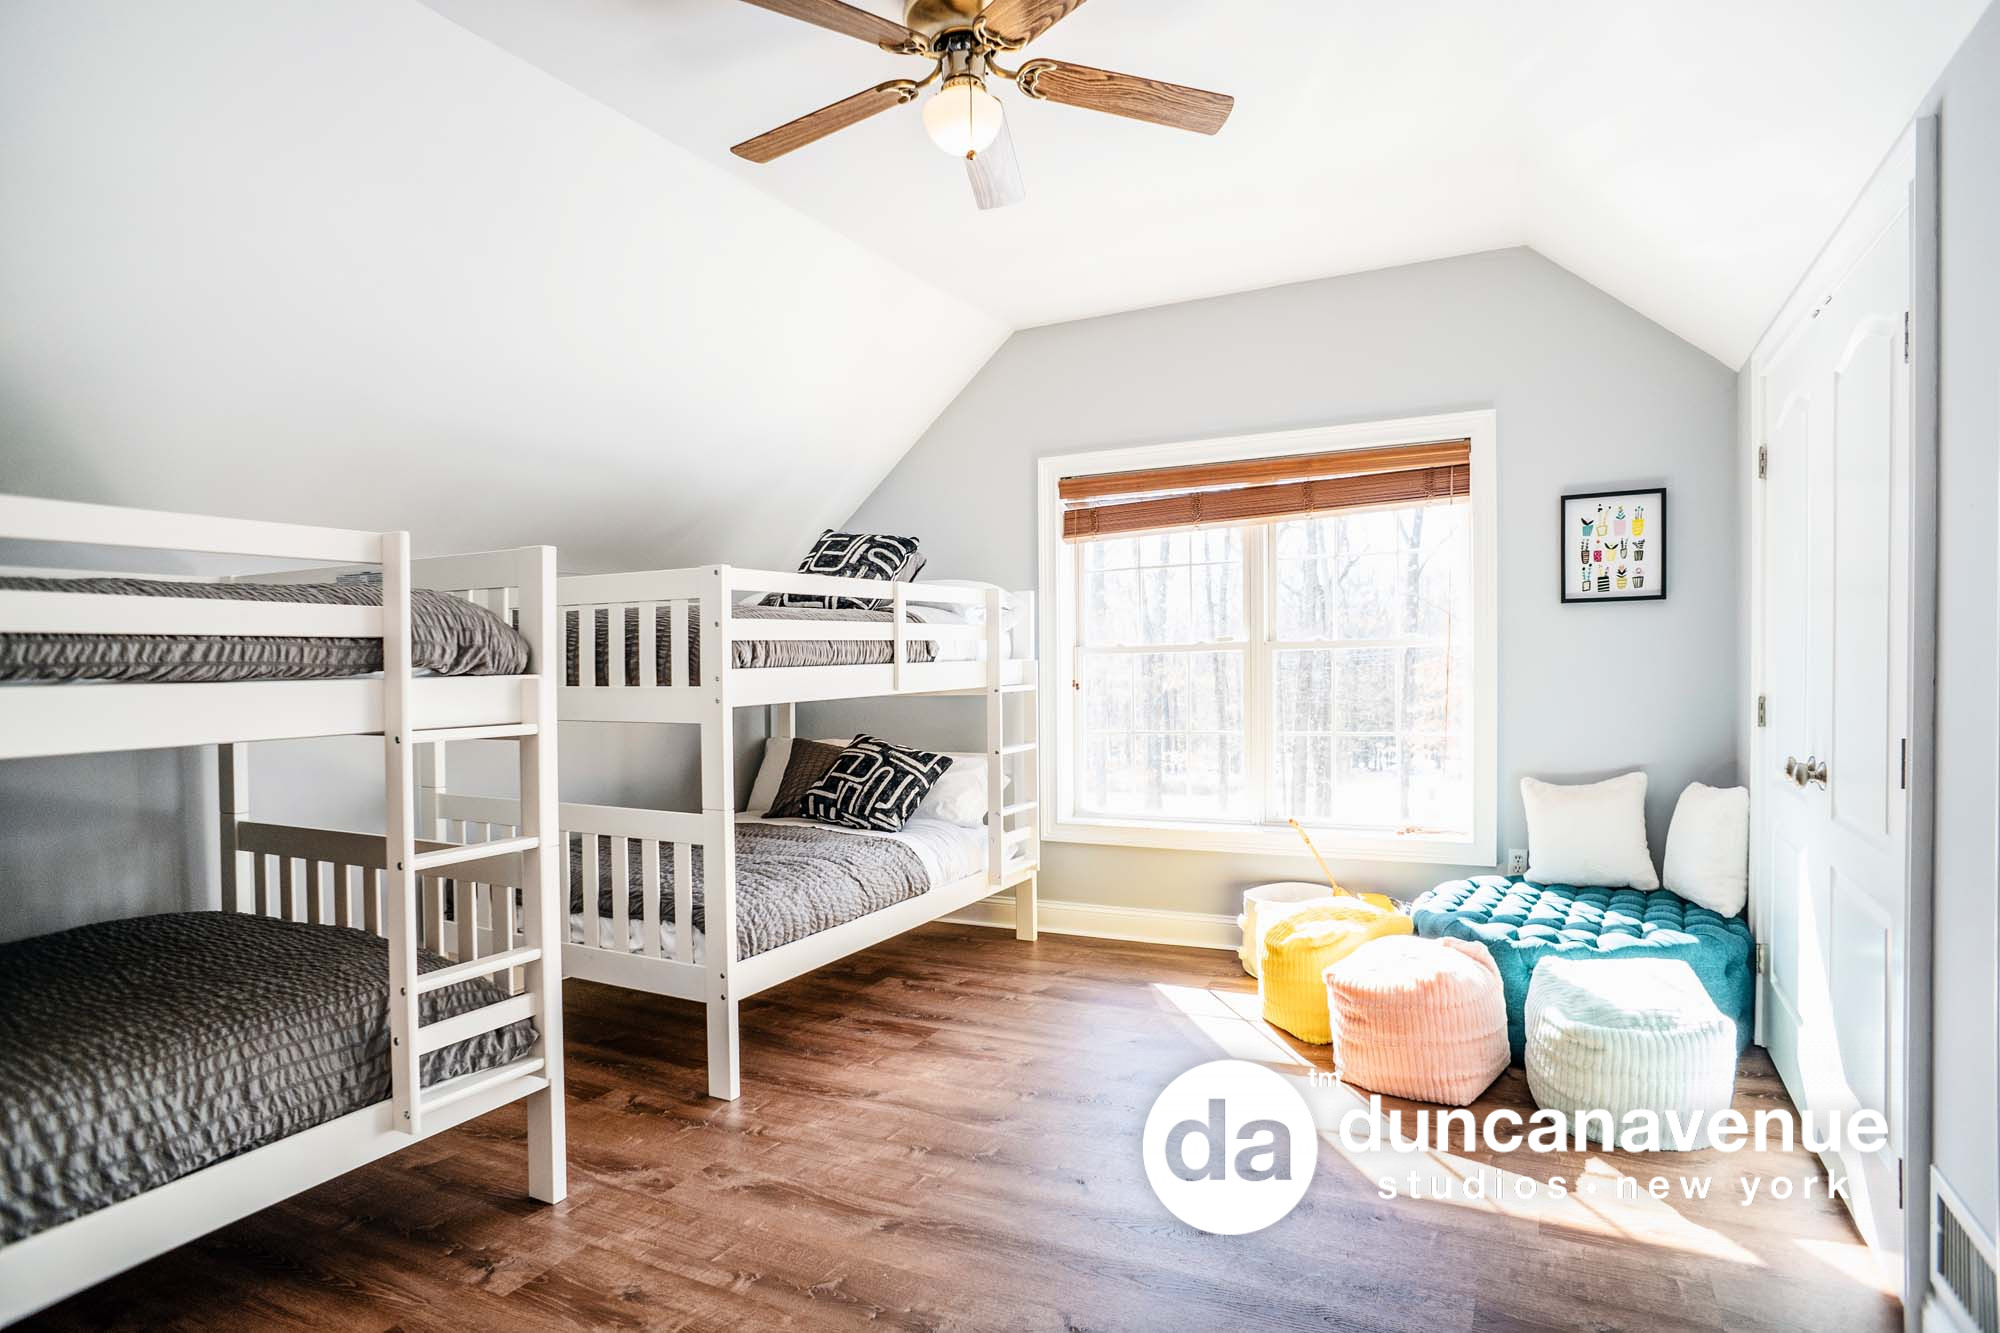 Hopewell Junction, NY – Airbnb Listing Photography by Maxwell Alexander – Best Airbnb Photographer in the Hudson Valley and Catskills